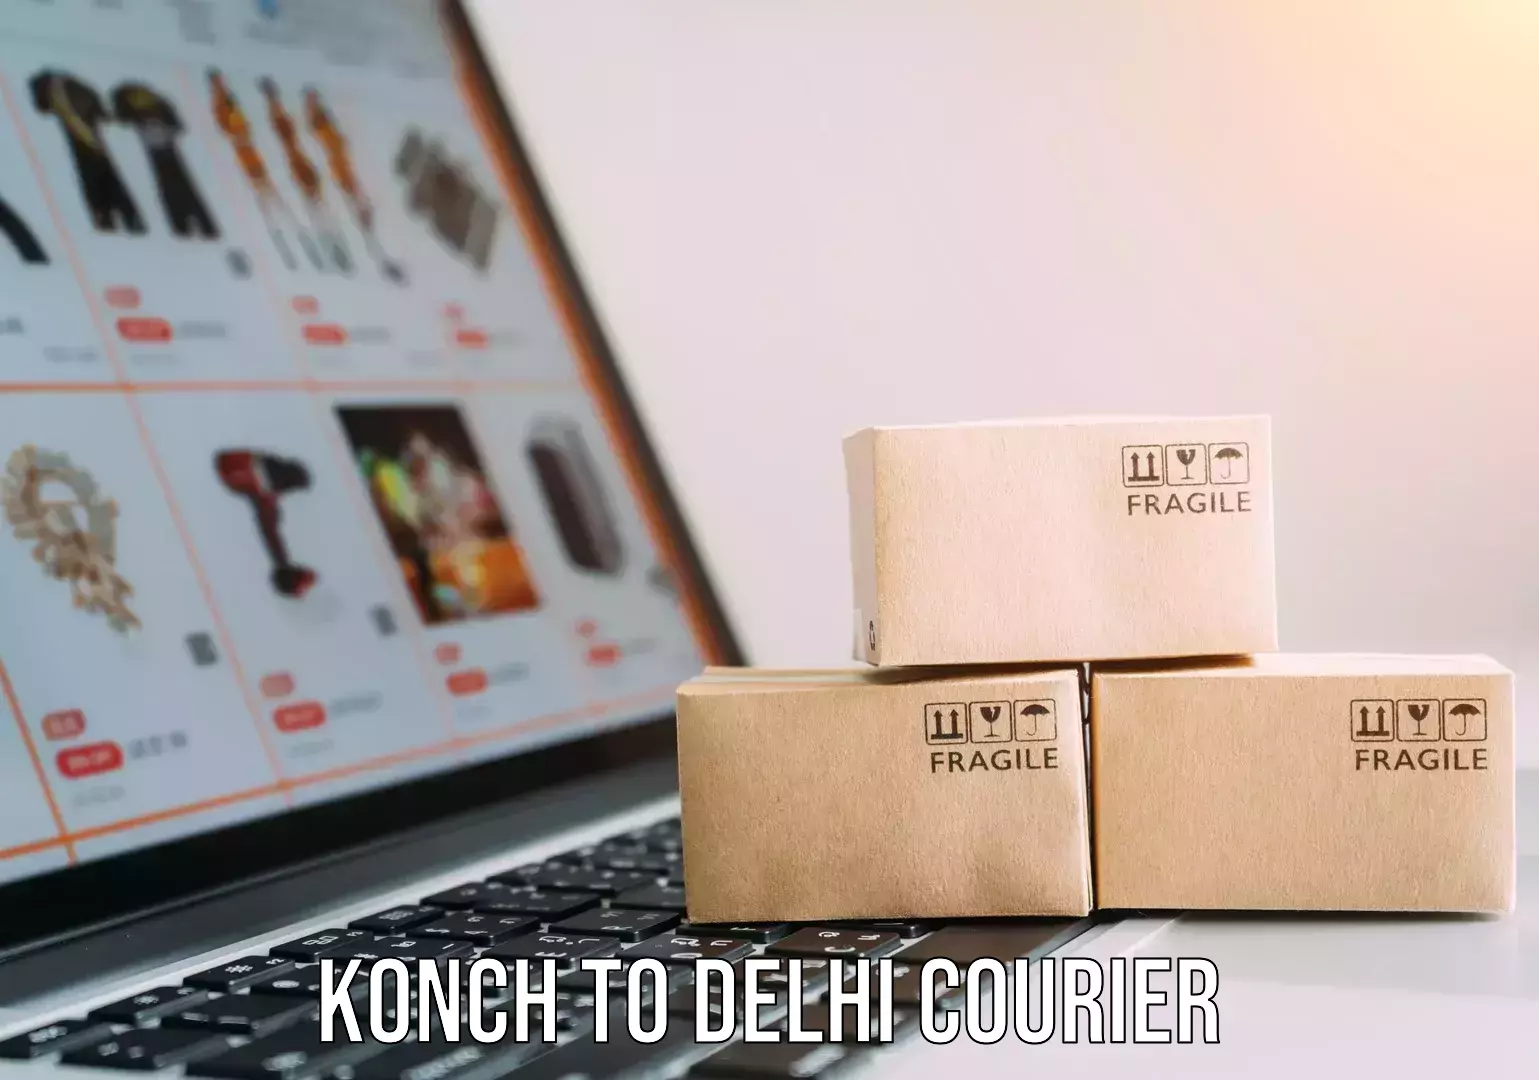 Furniture relocation experts Konch to Delhi